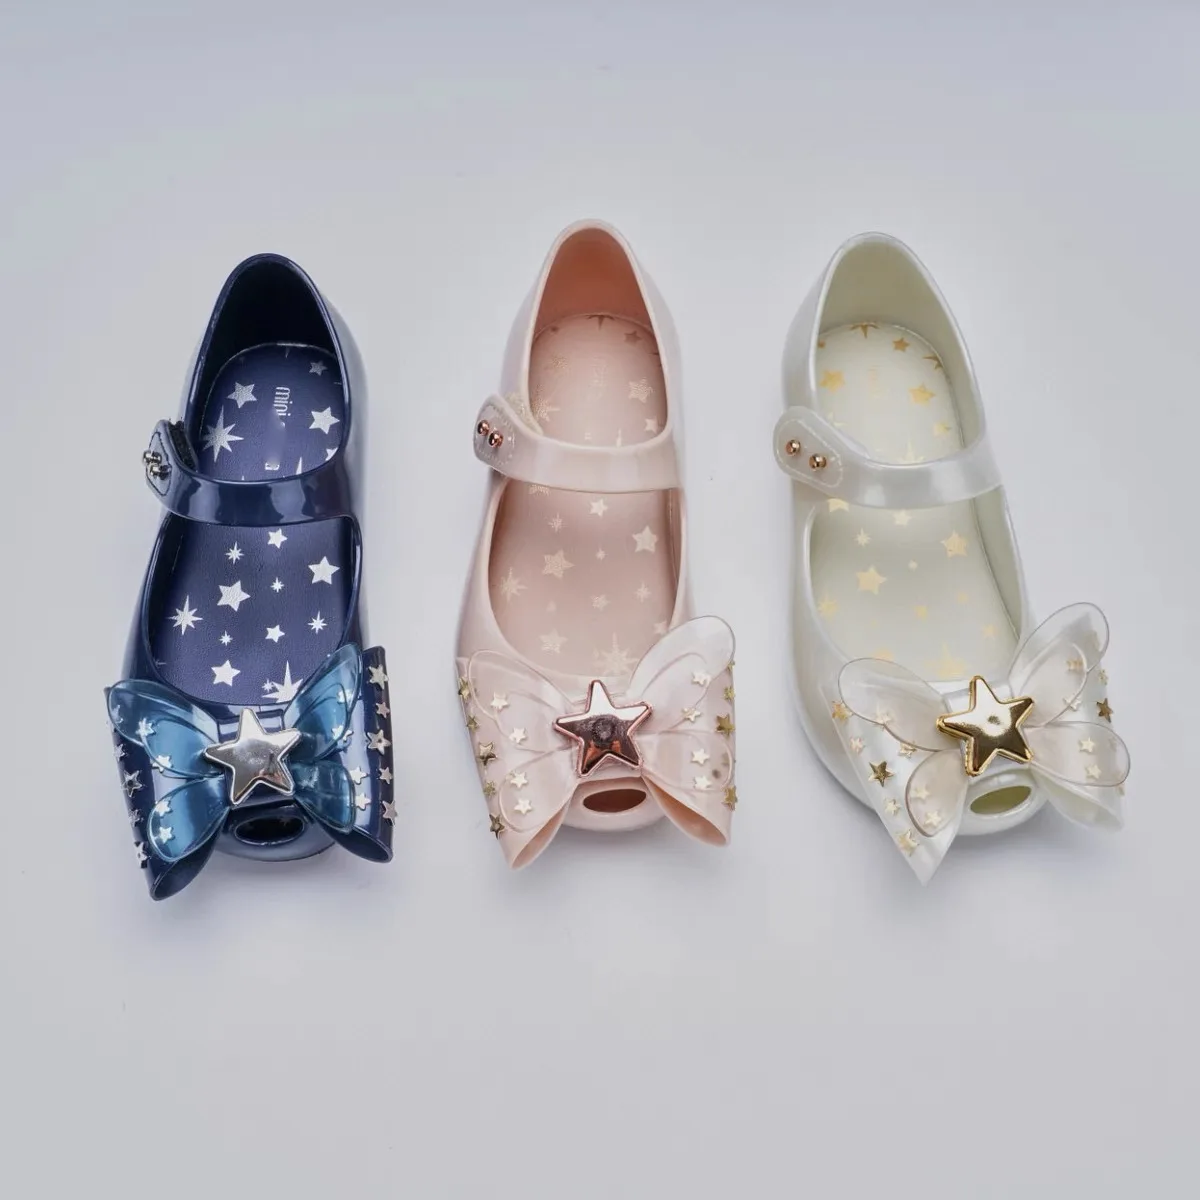 

Mini Melissa New Style Princess Spring Jelly Shoes Bowknot Girl Fashion Soft Sandals Kids Classical Soft Sole Beach Shoes